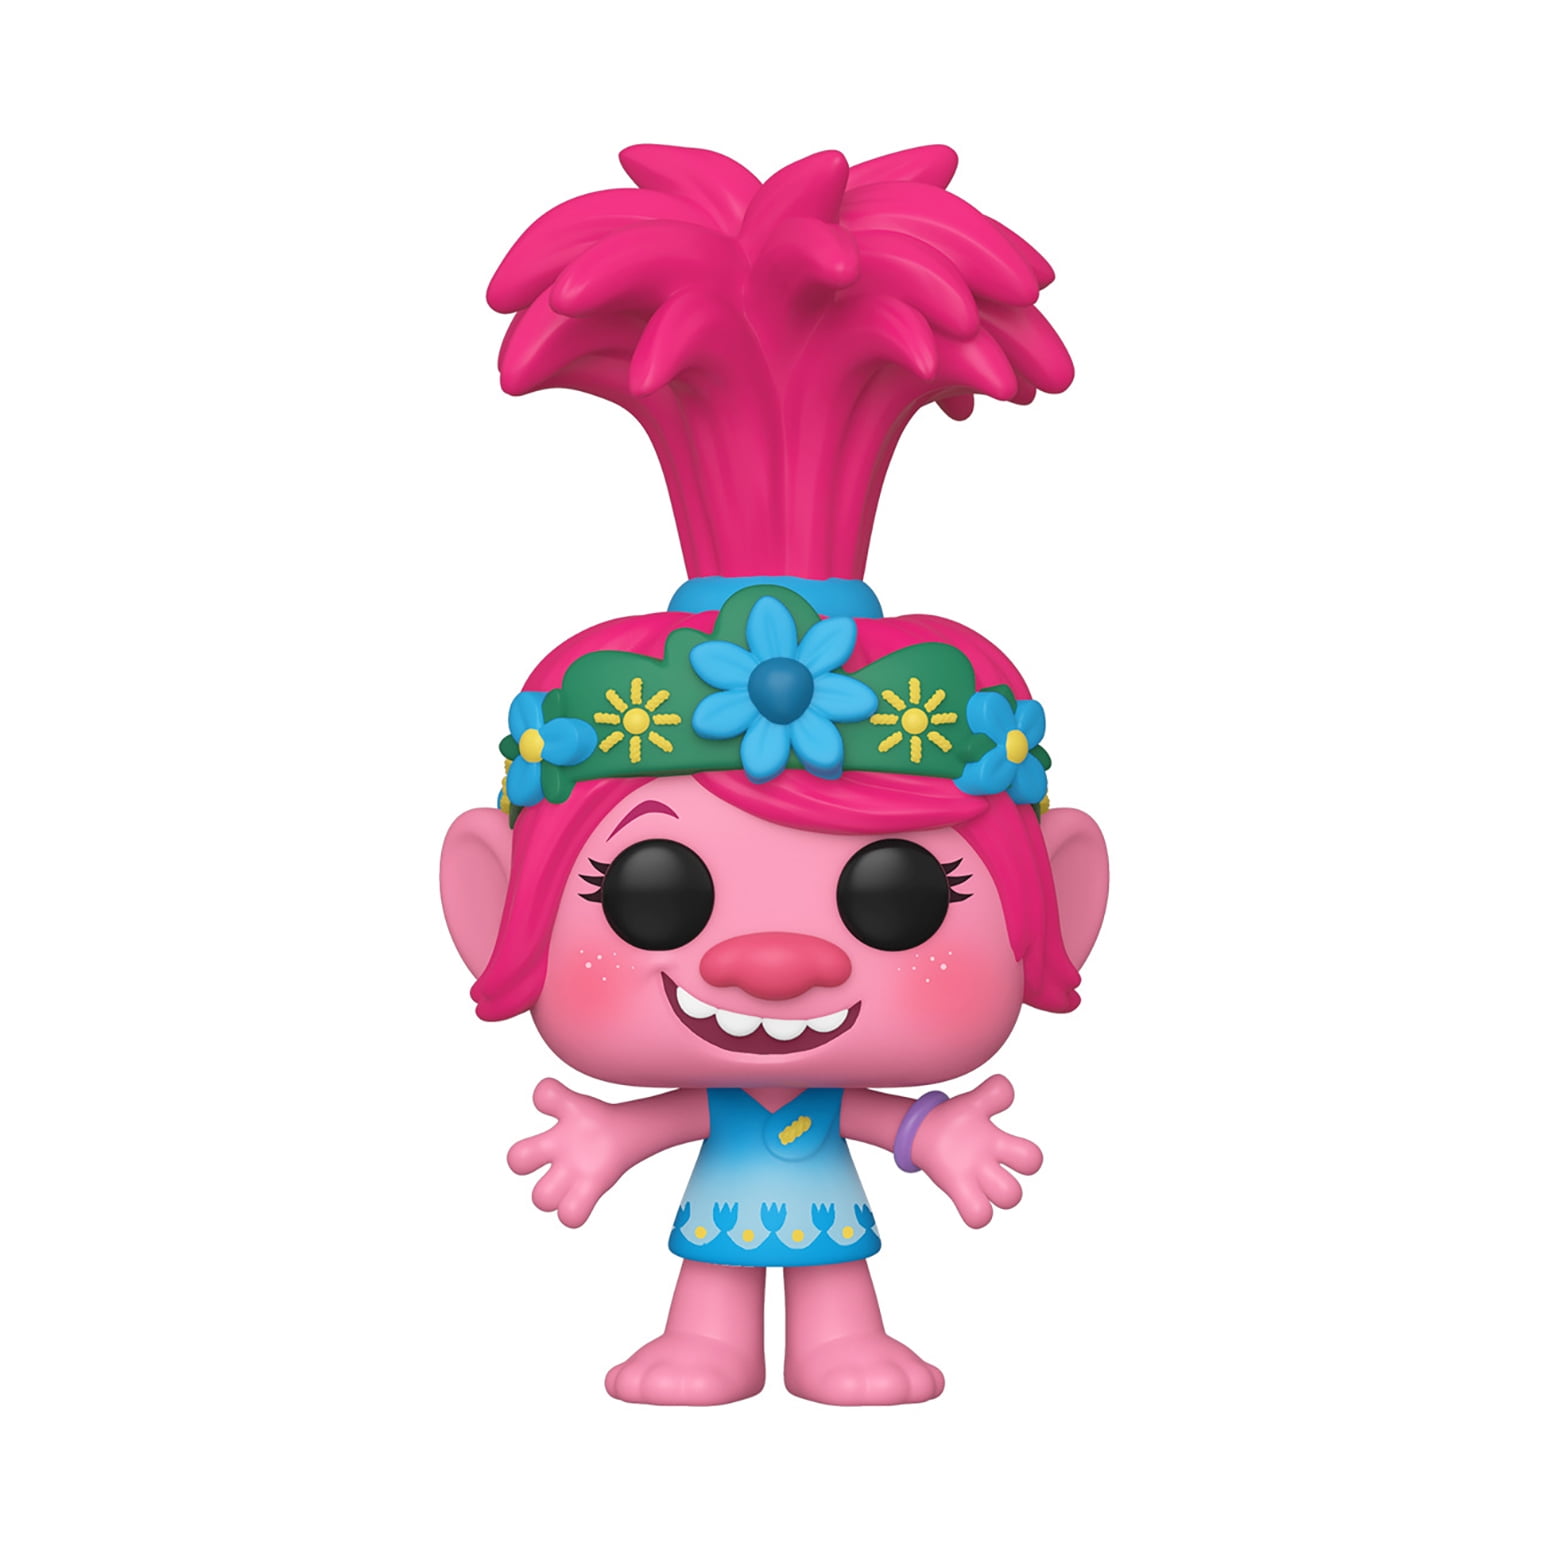 Funko Pop! Trolls World Tour - Branch, 47002, 880, original, toys, boy,  girl, gift, collector, doll, gift, official license